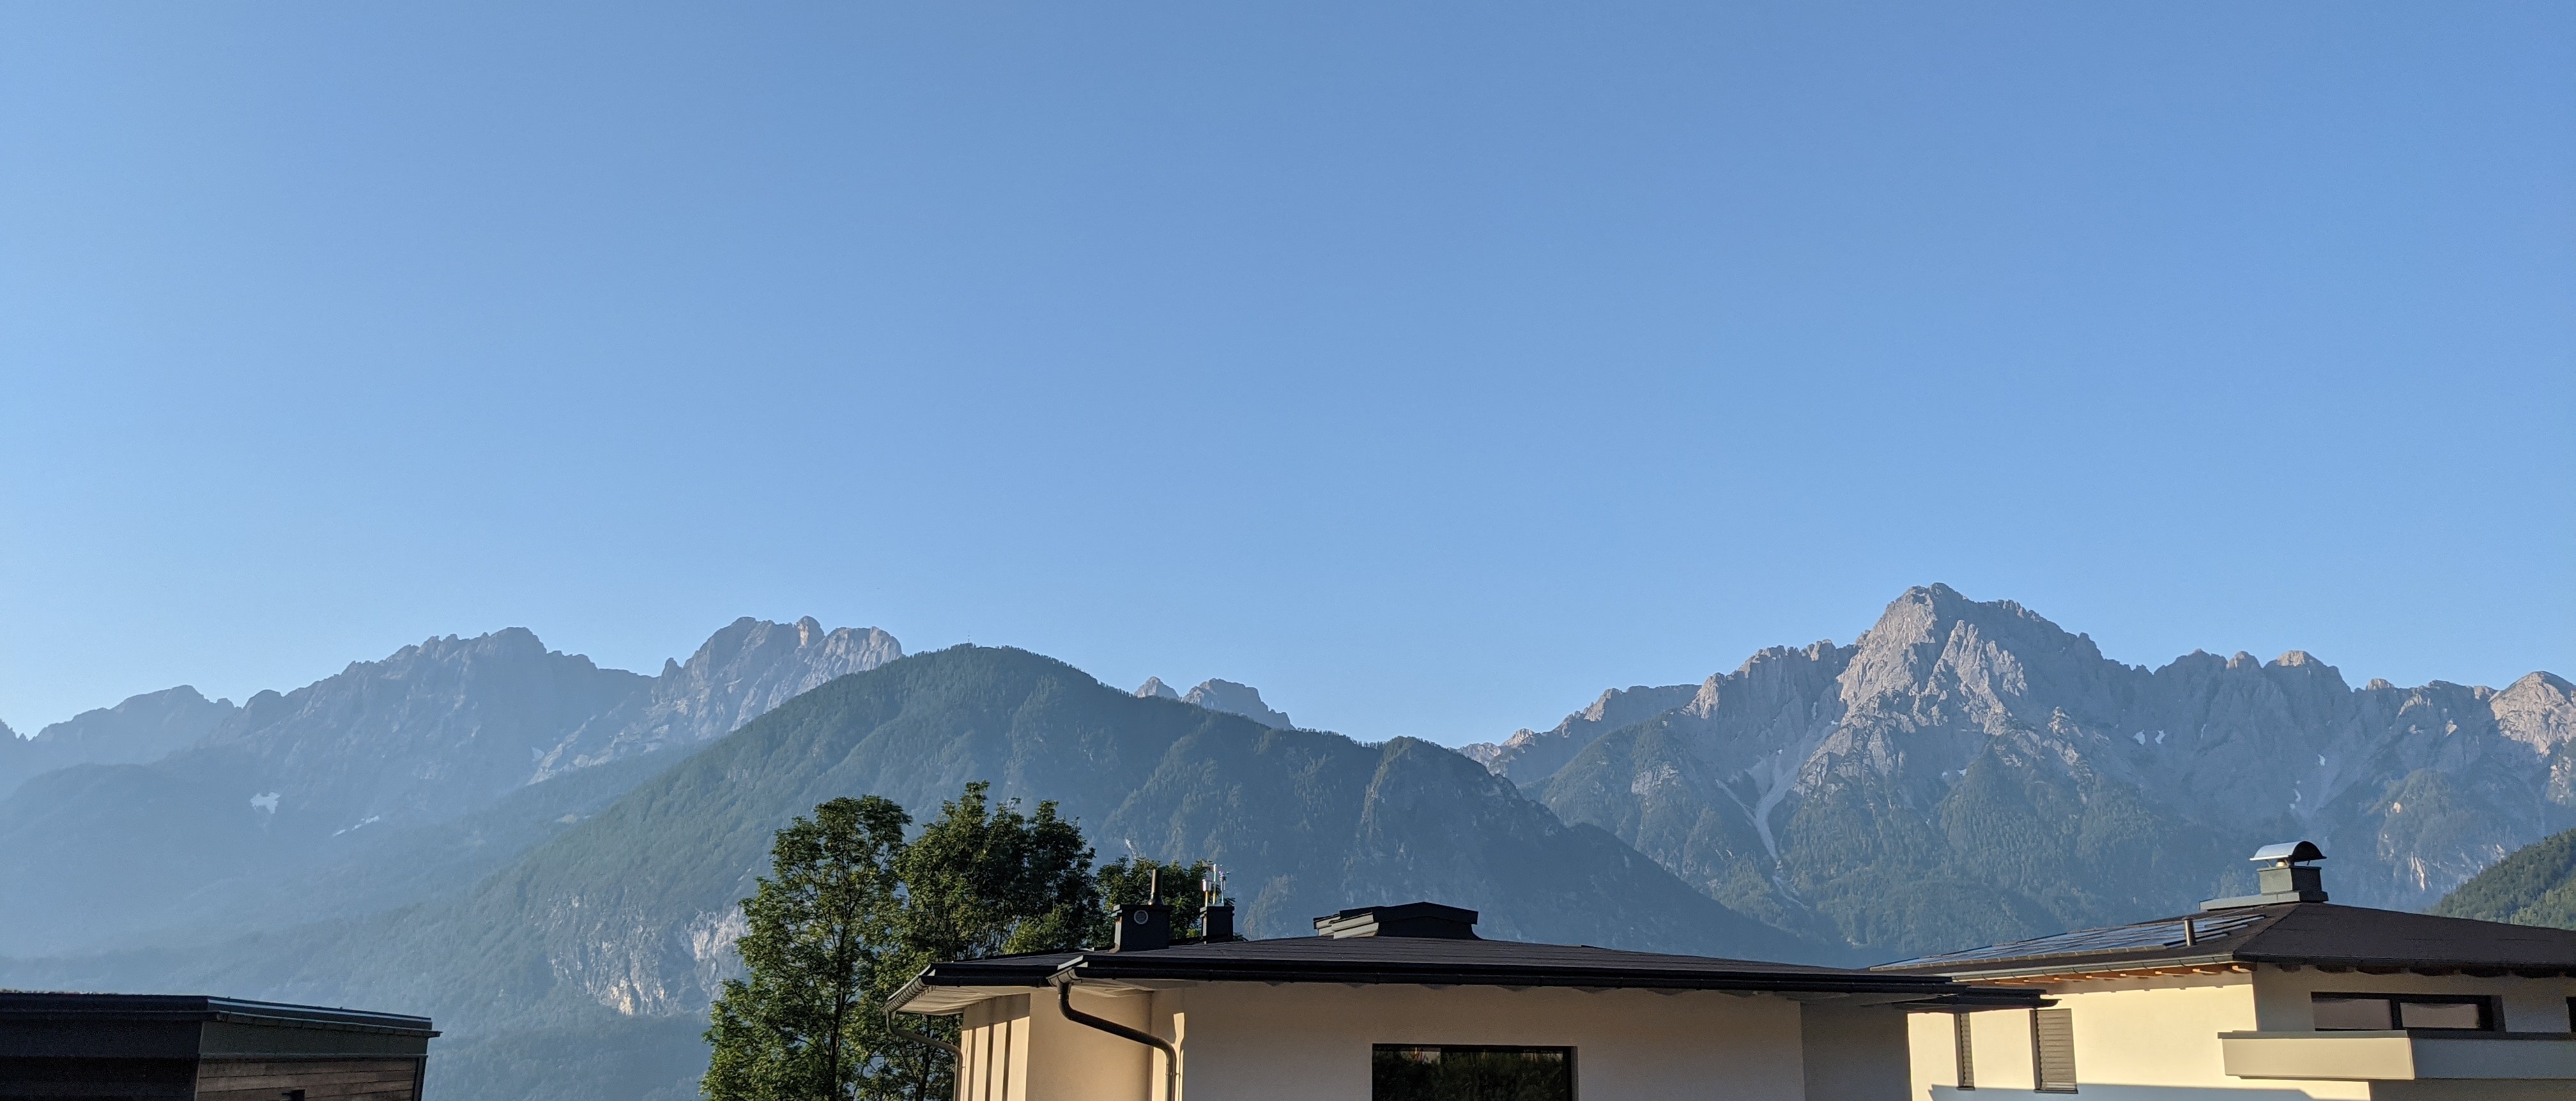 Last day in Lienz with nice morning weather